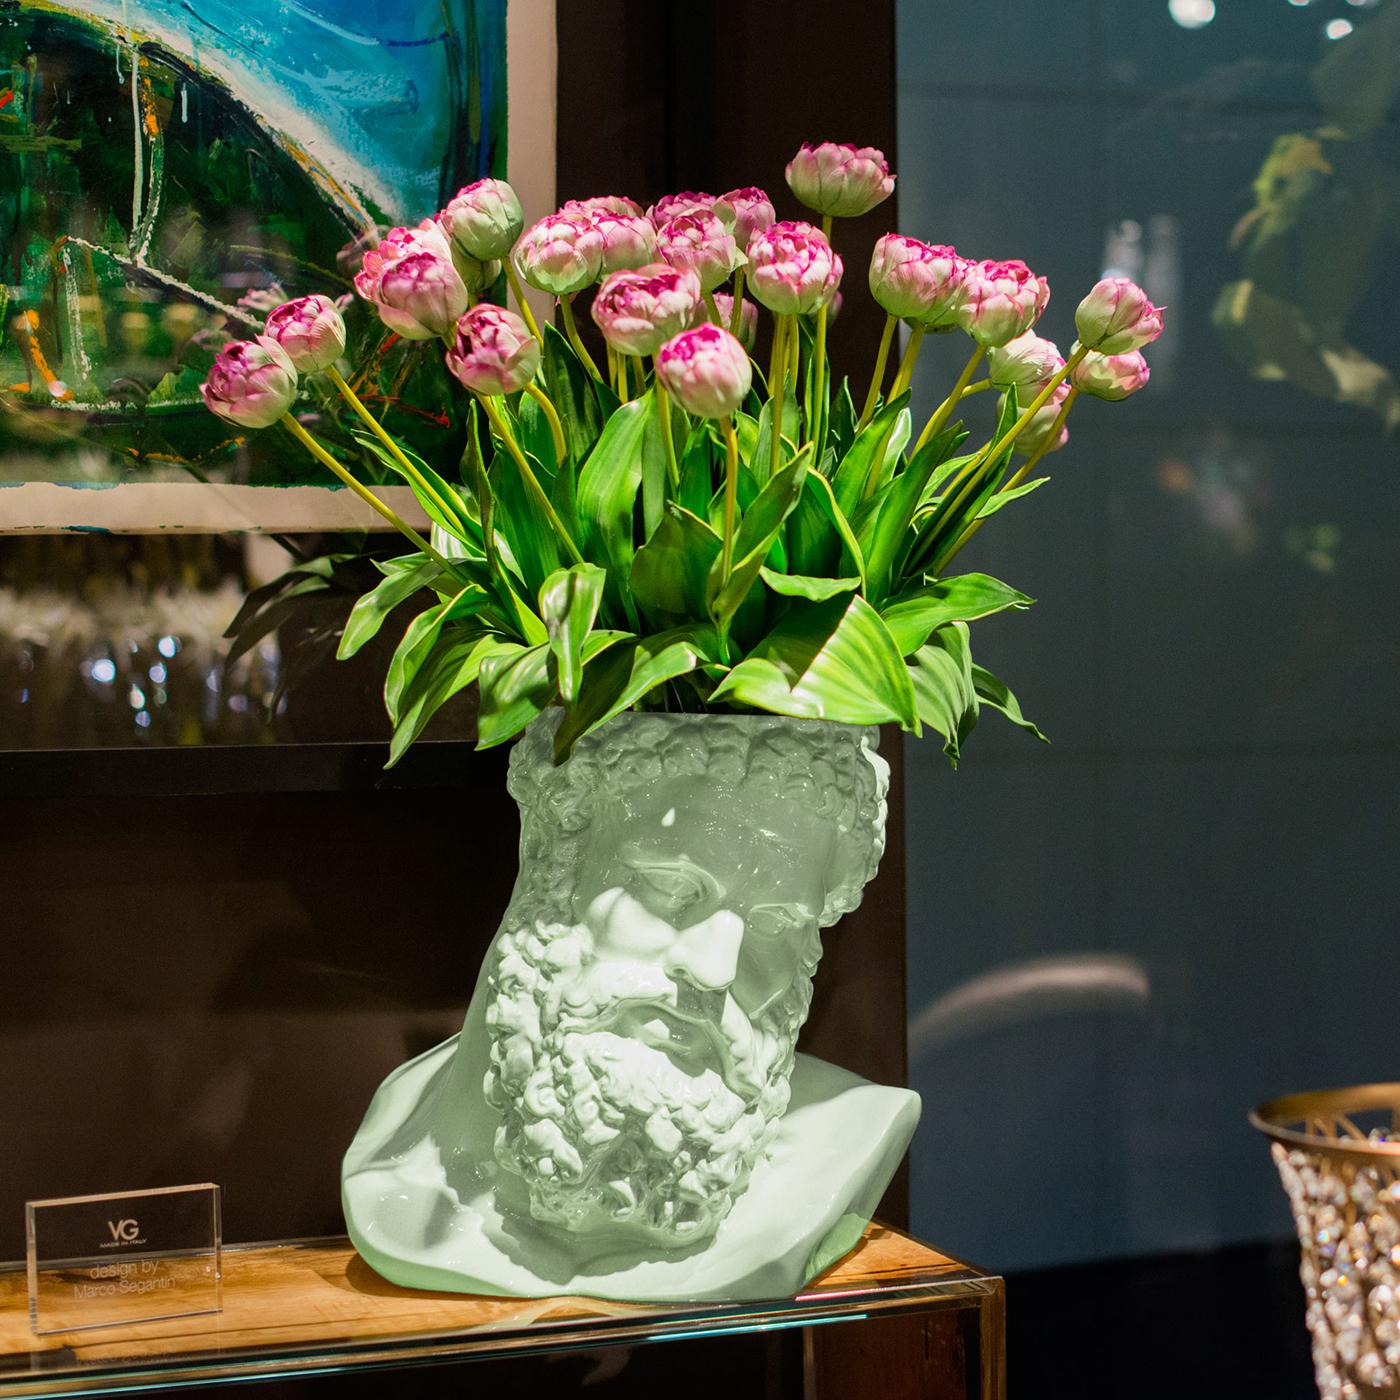 This modern vase is inspired by classical Italian sculptures. Depicting the bust of Hercules, this decorative piece is made from ceramic and boasts a stunning mint finish. Fusing new with old, the Hercules Neo Mint Vase is beautifully hand-crafted